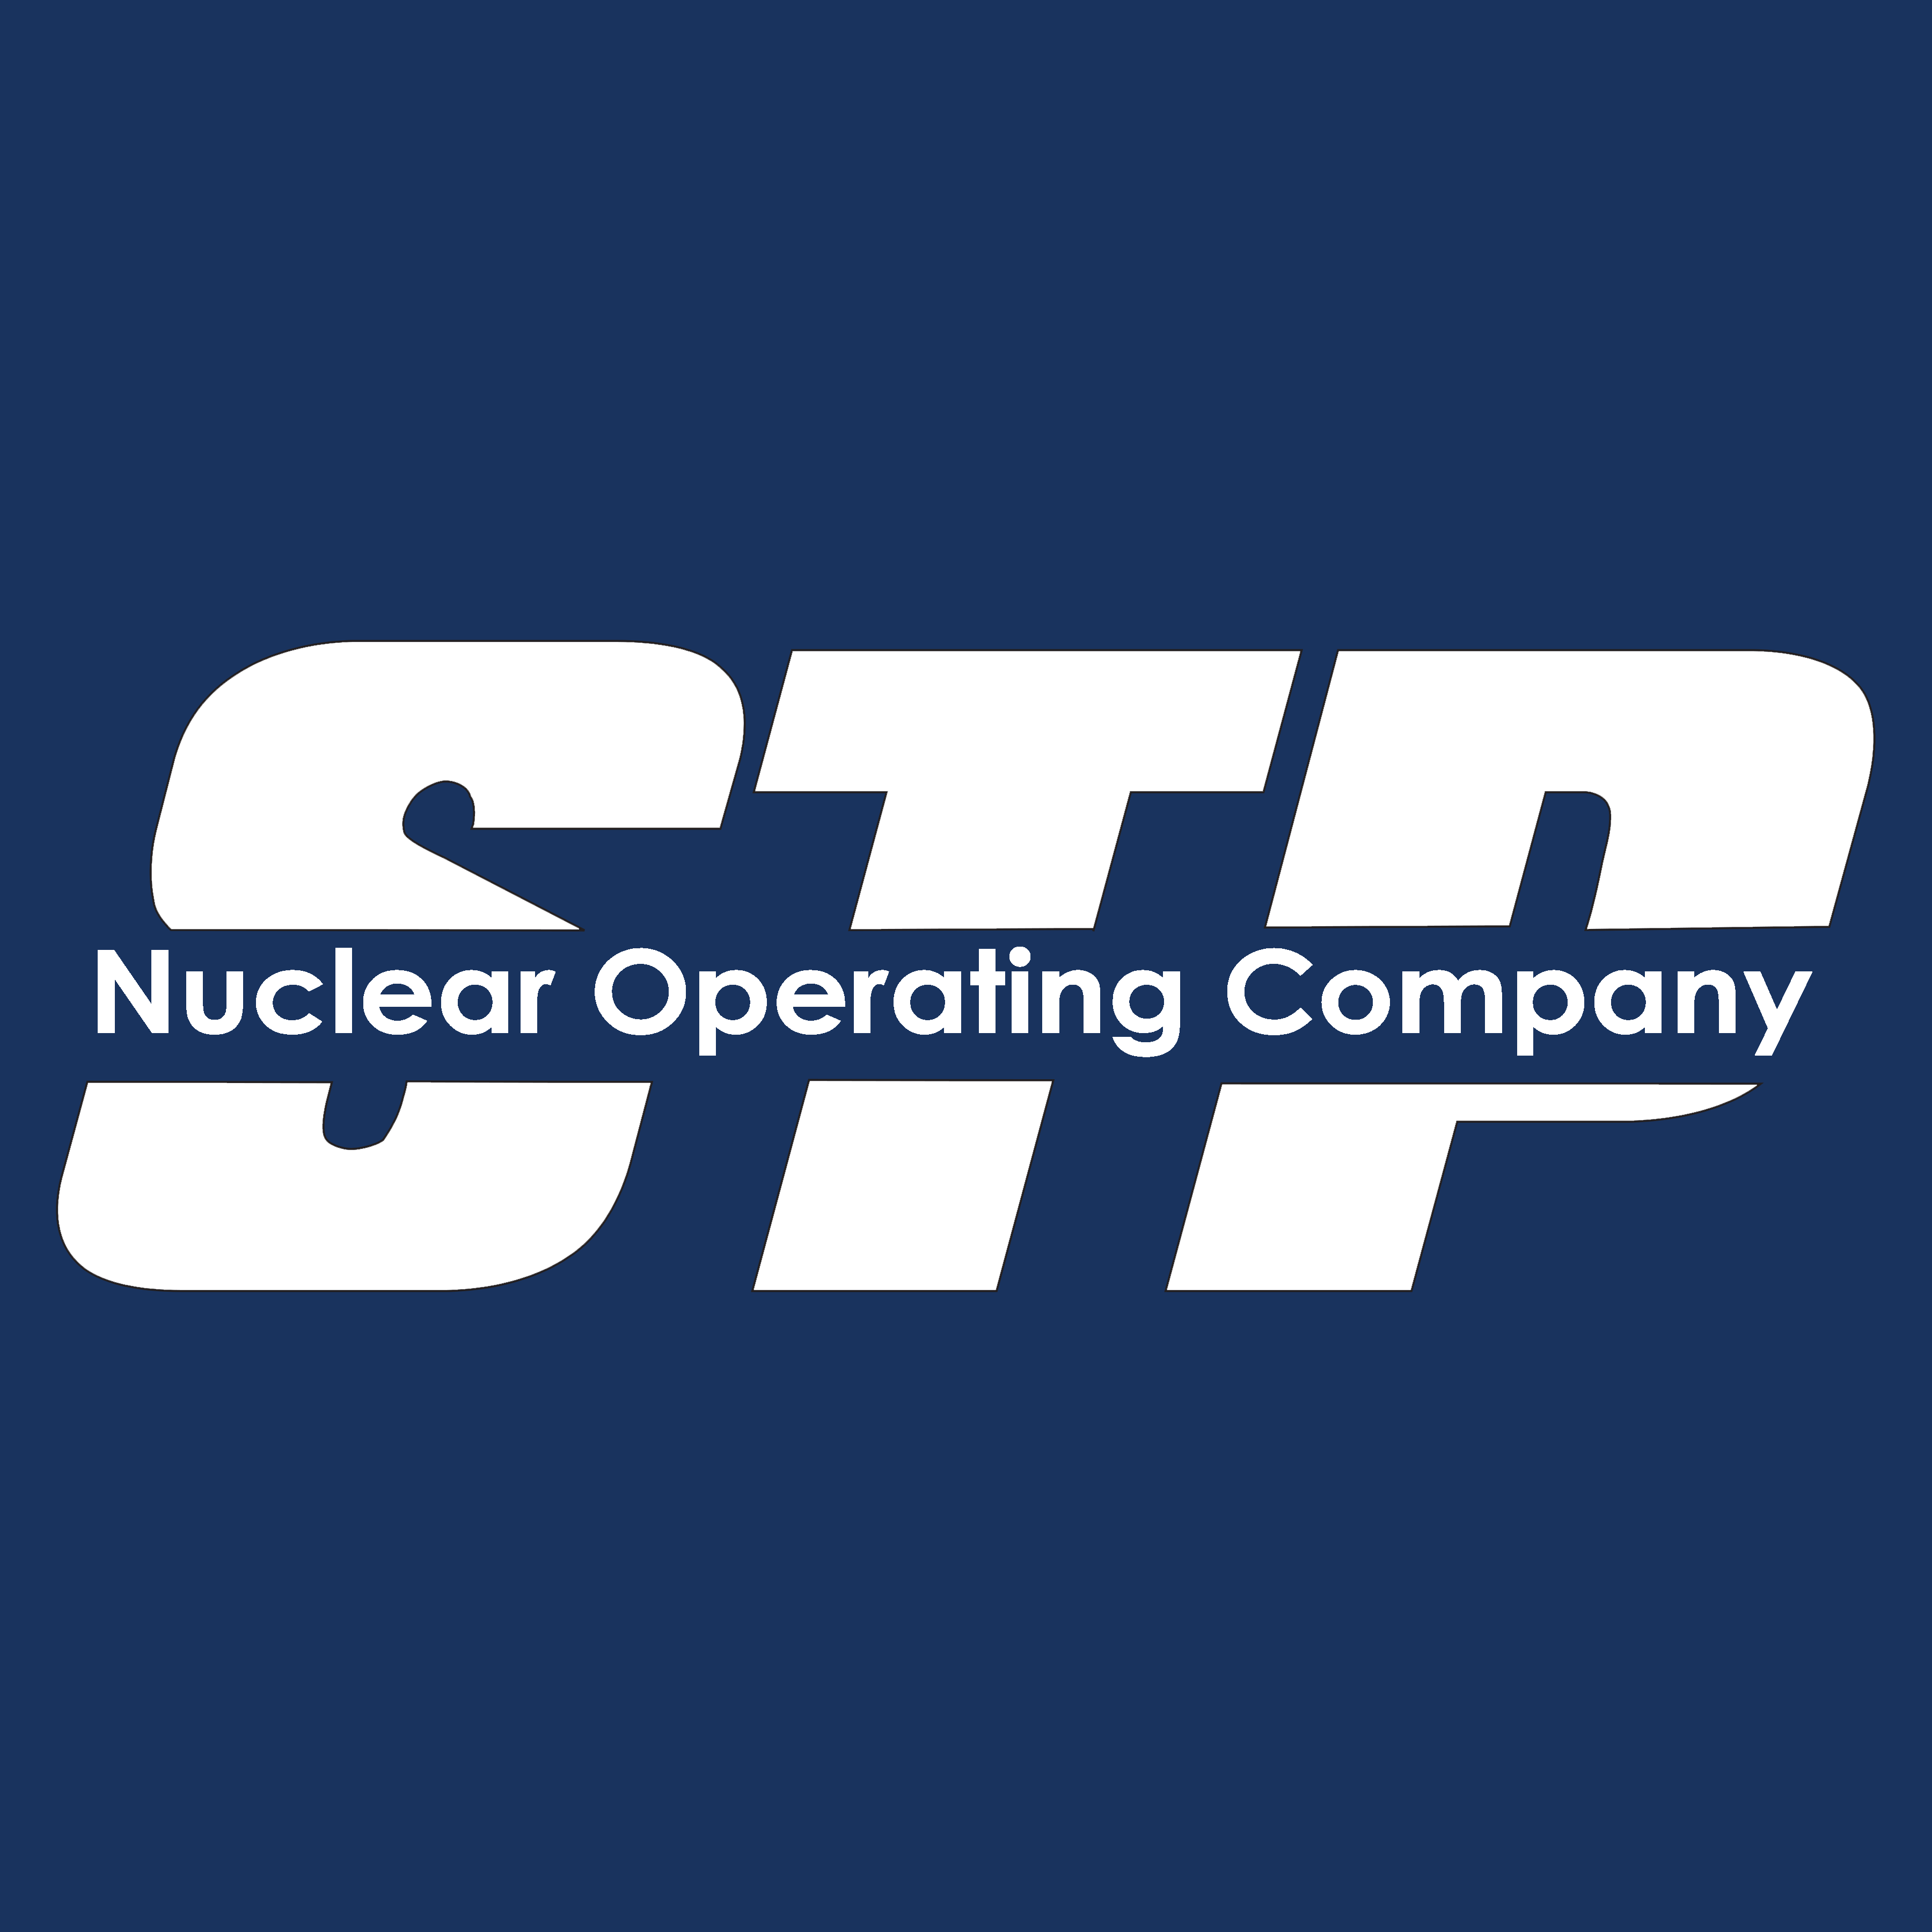 STP is one of the newest and largest nuclear power facilities in the nation; producing 2,700 MW of clean, safe and reliable electricity. Learn more @ https://t.co/x7JNlGz5KR